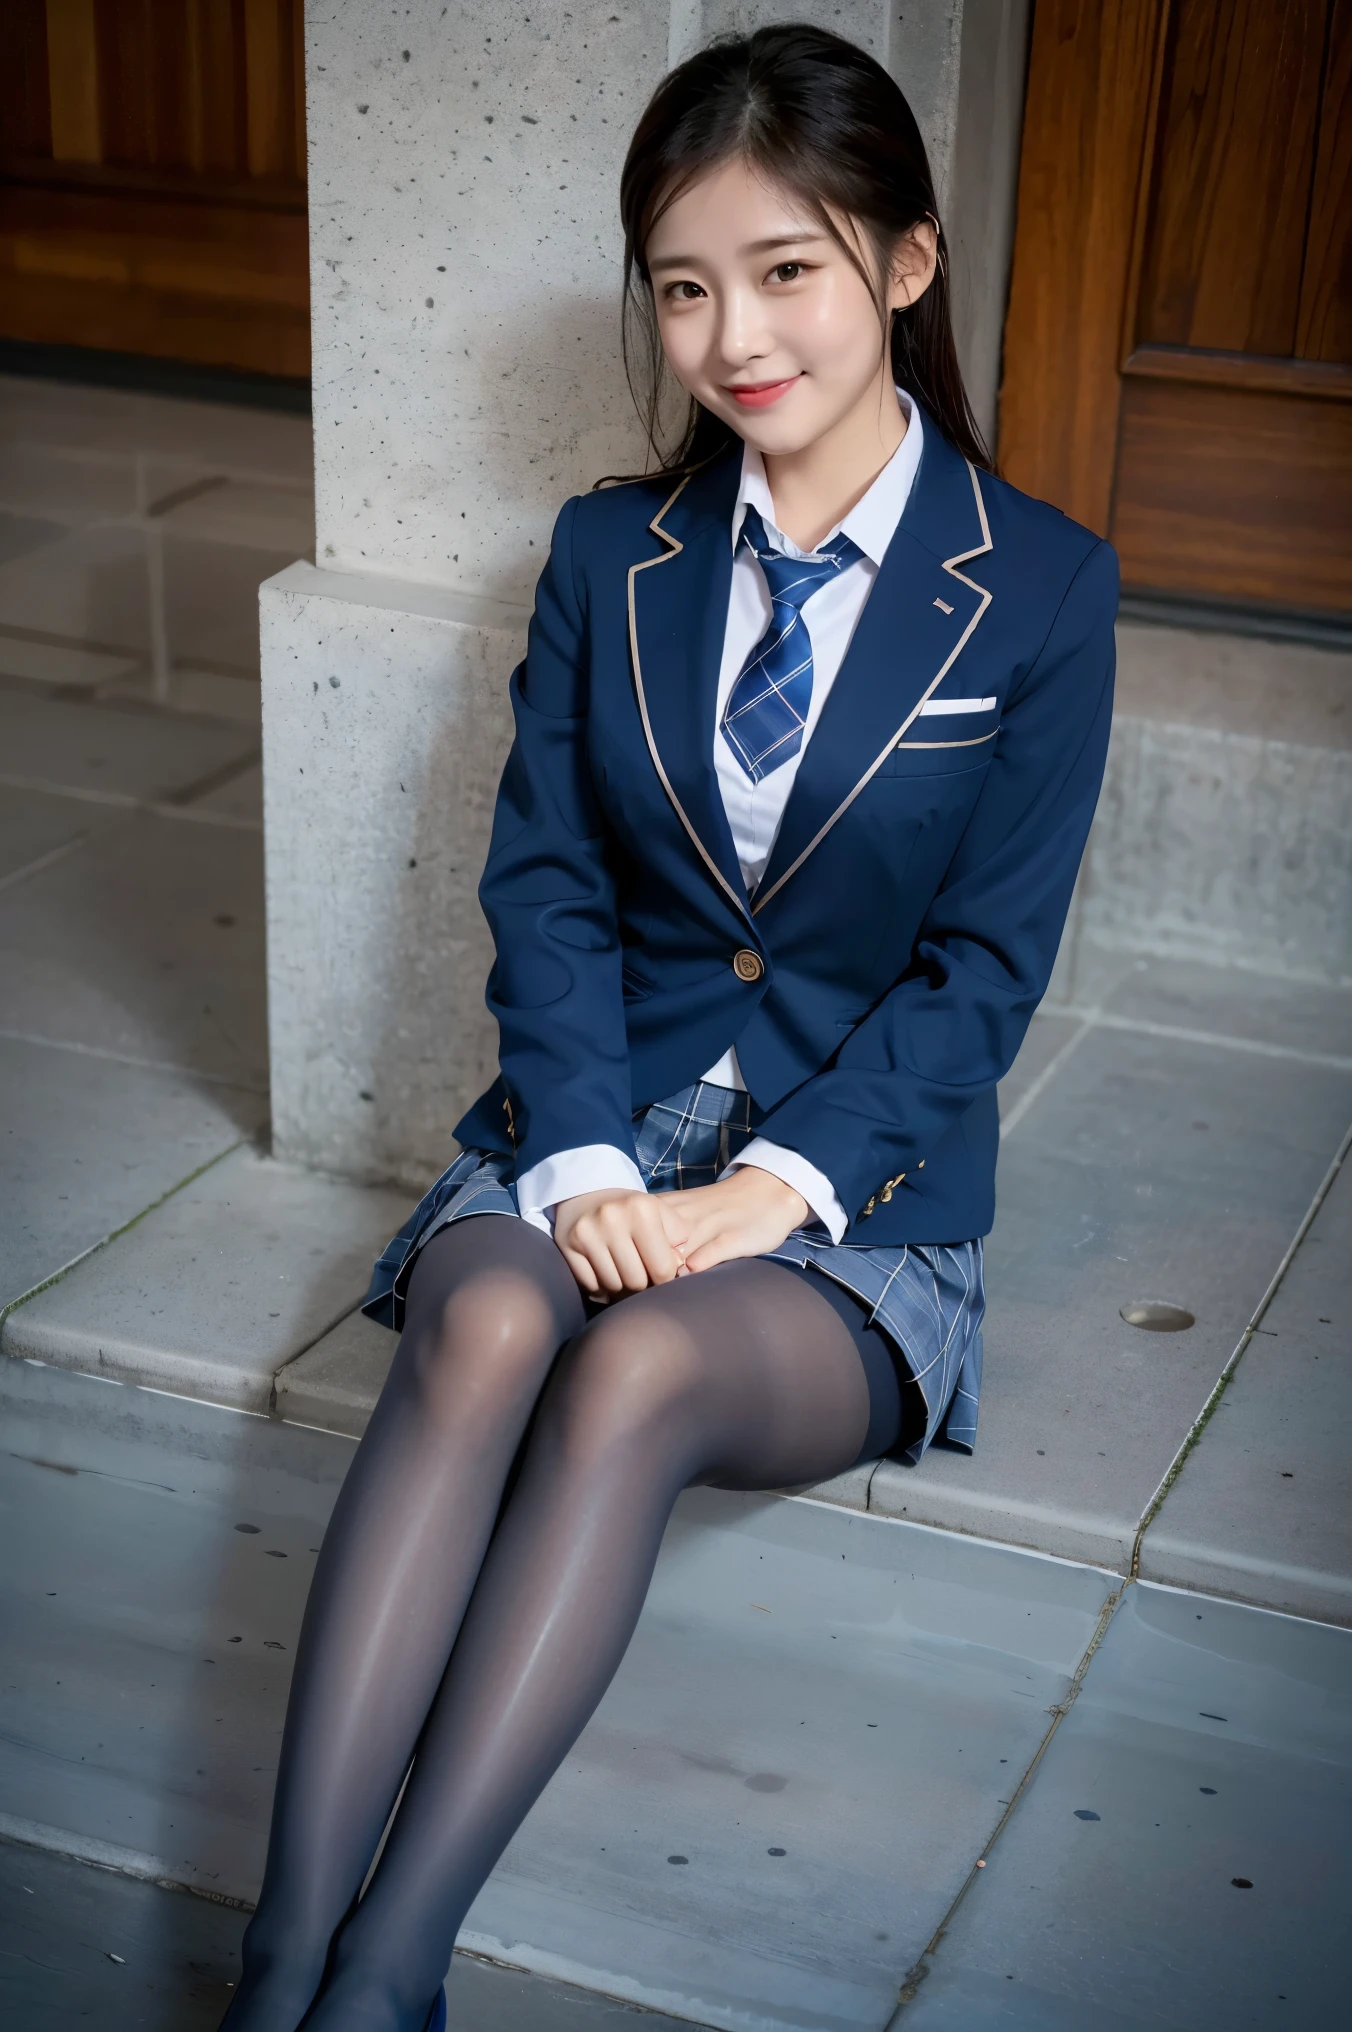 (8k), (highest quality: 1.2), (Realistic), (Realistic: 1.37), Ultra-high resolution, (1 girl), cute, blush,Embarrassed smile, Mouth closed, Beautiful details, Beautiful Nose, Wet Hair, Giant Dulcefo, pork, Thighs，Self Snap,University Uniforms,(A simple navy blue blazer:1.4),(Pleated skirt:1.2),(The skirt and tie are gray tartan check pattern.:1.3),(Sitting:1), Sit on the ground,(Hold my feet:1),(Shiny Pantyhose:1.2),from the front,knees